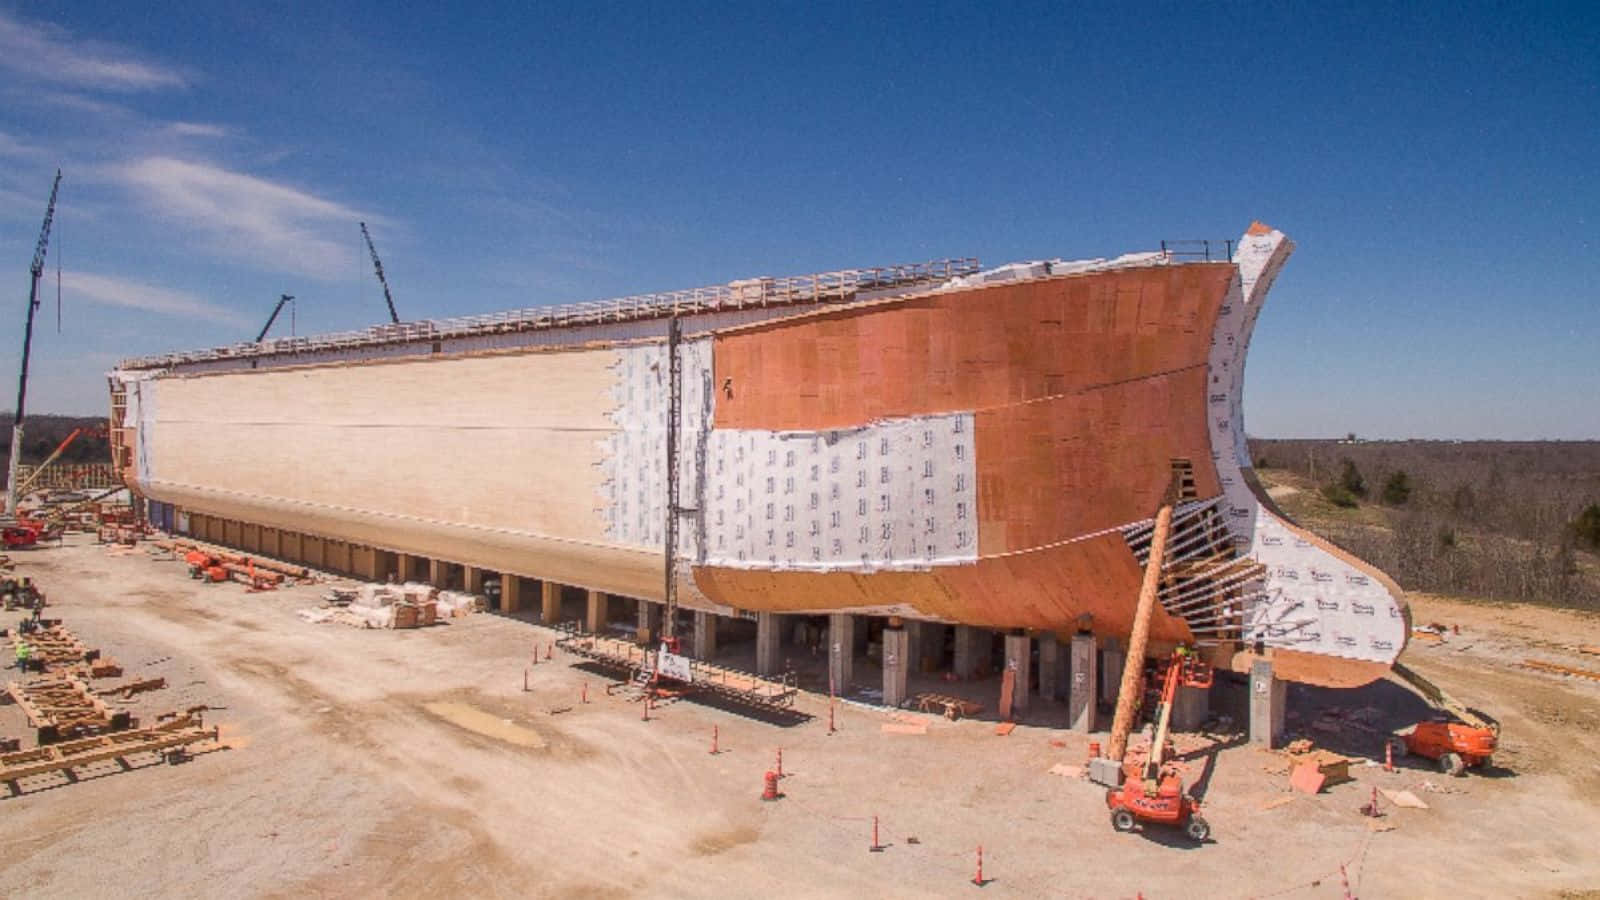 The Ark Of The Covenant Is Being Built In A Construction Site